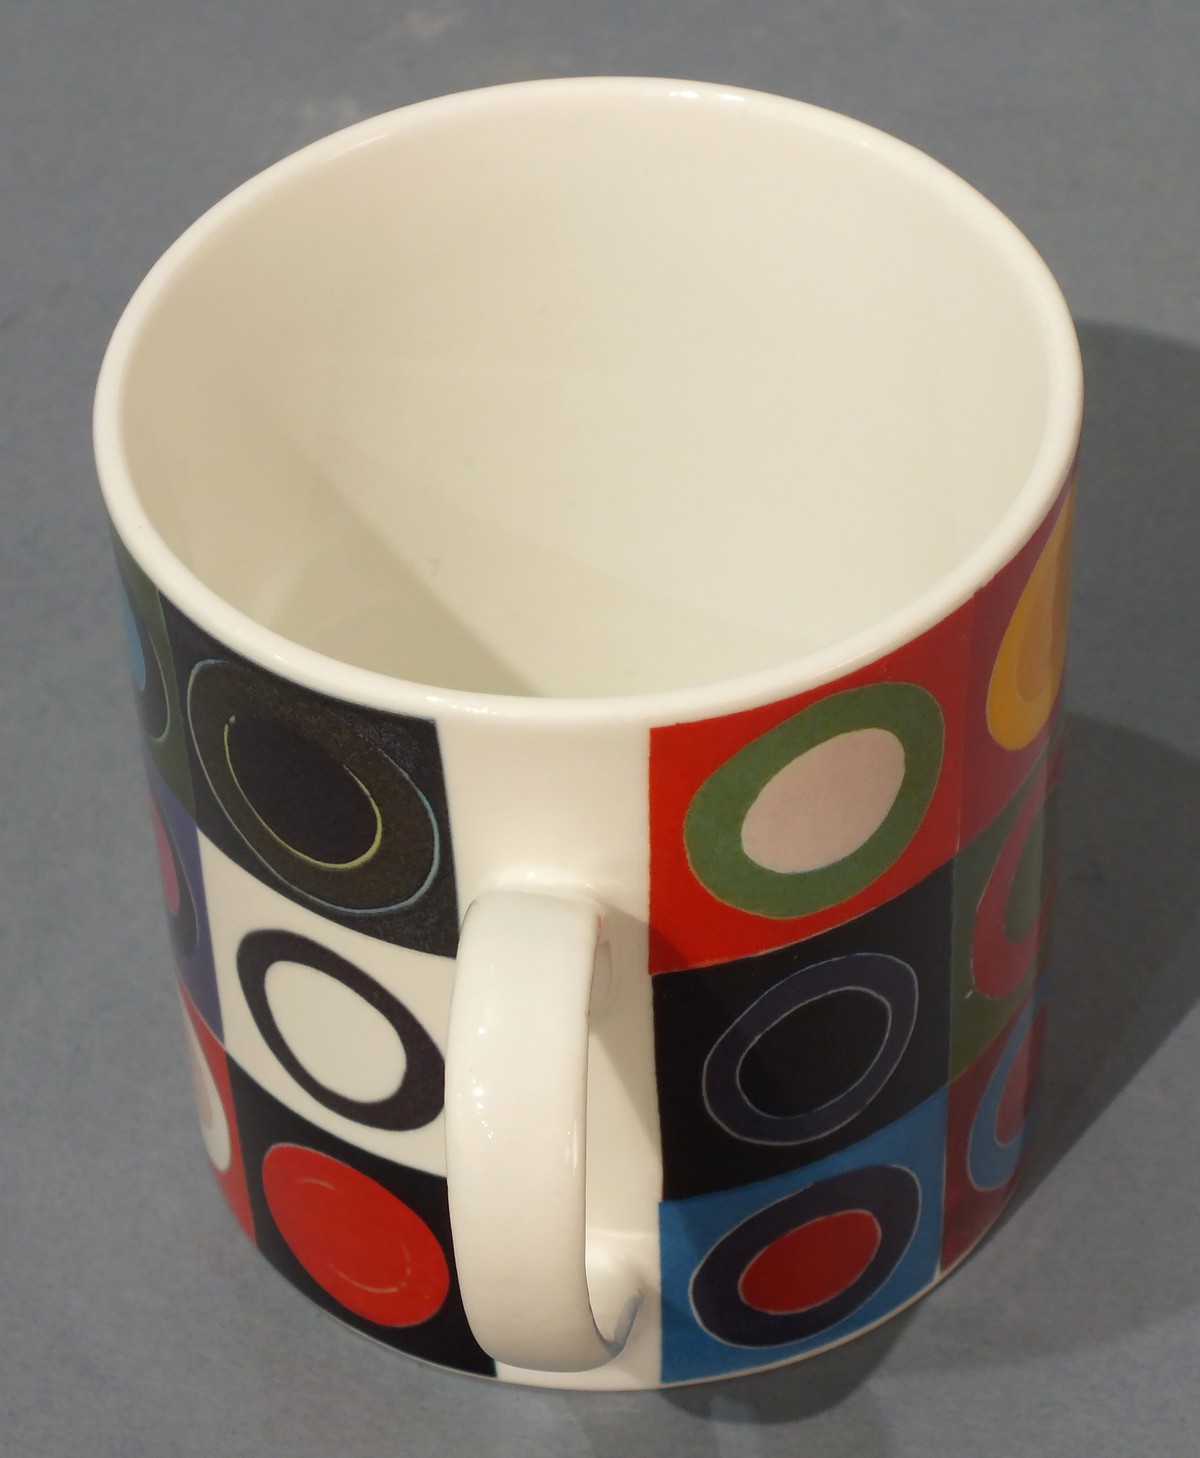 Sir Terry FROST (British 1915-2003) Orchard Tambourine Mug (on behalf of Royal Academy of Arts), - Image 7 of 10